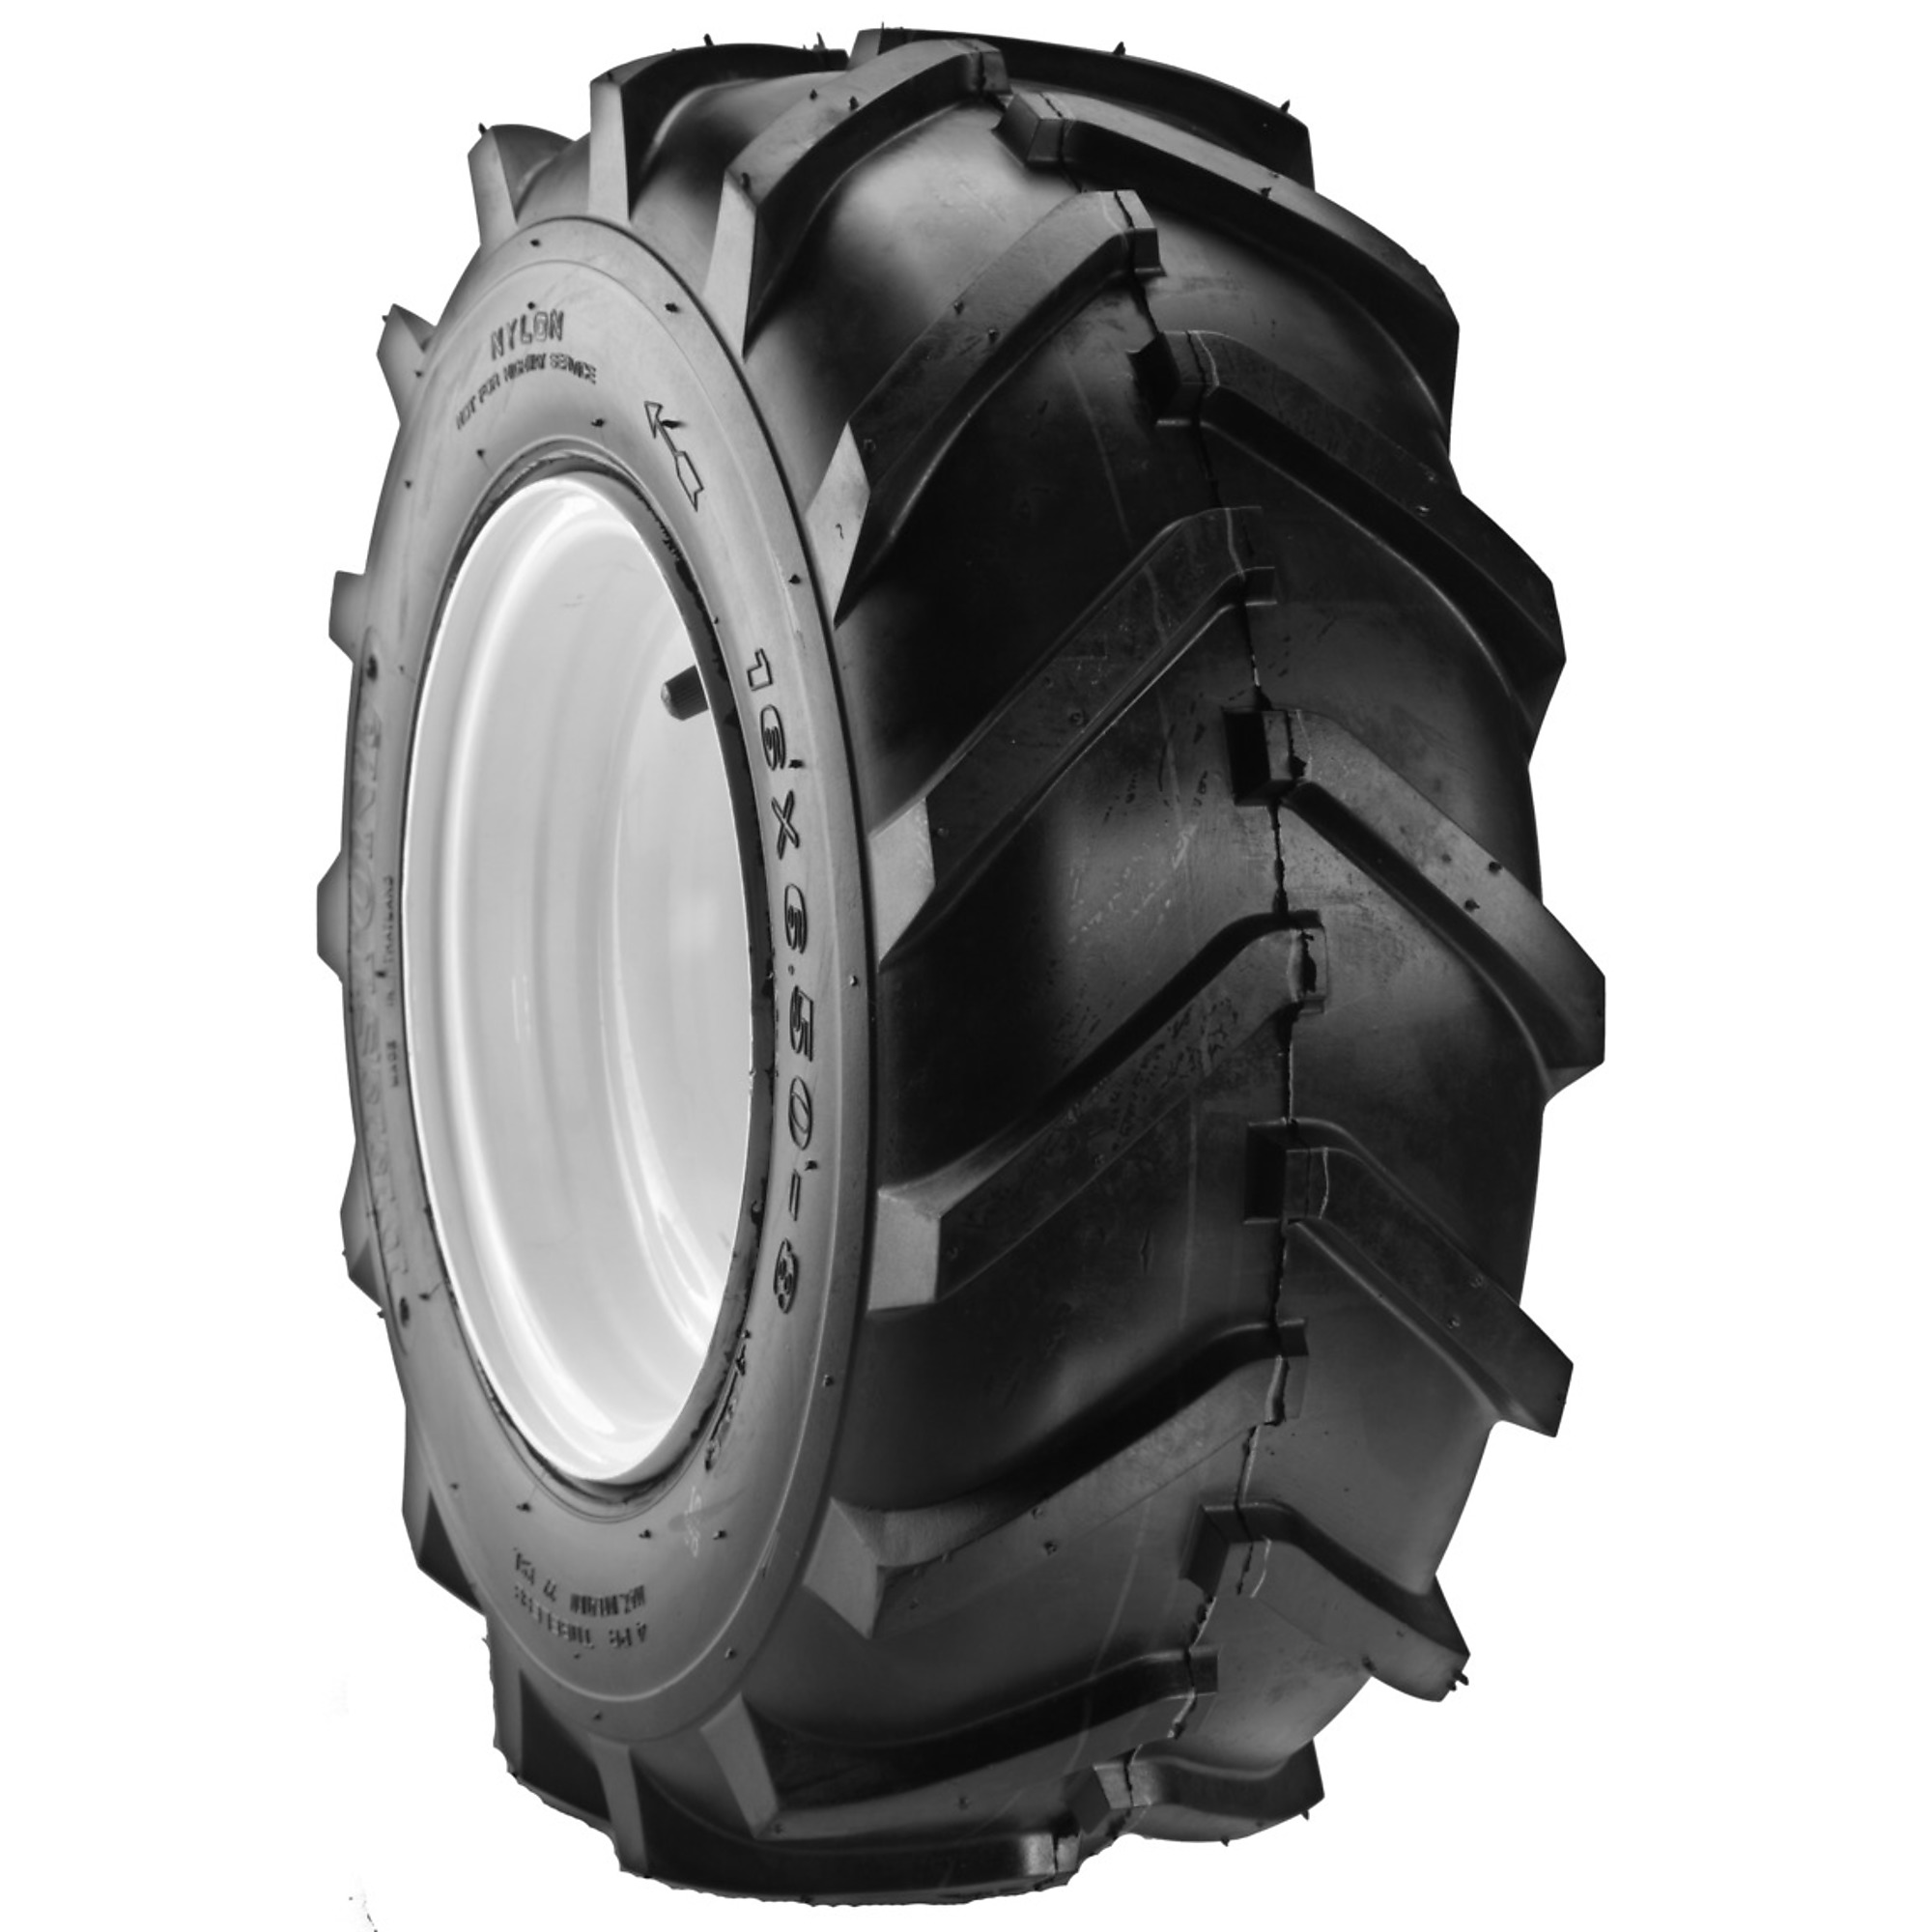 RubberMaster, 4.80/4.00-8 4P TL AG (Tire Only), Tire Size 4.80